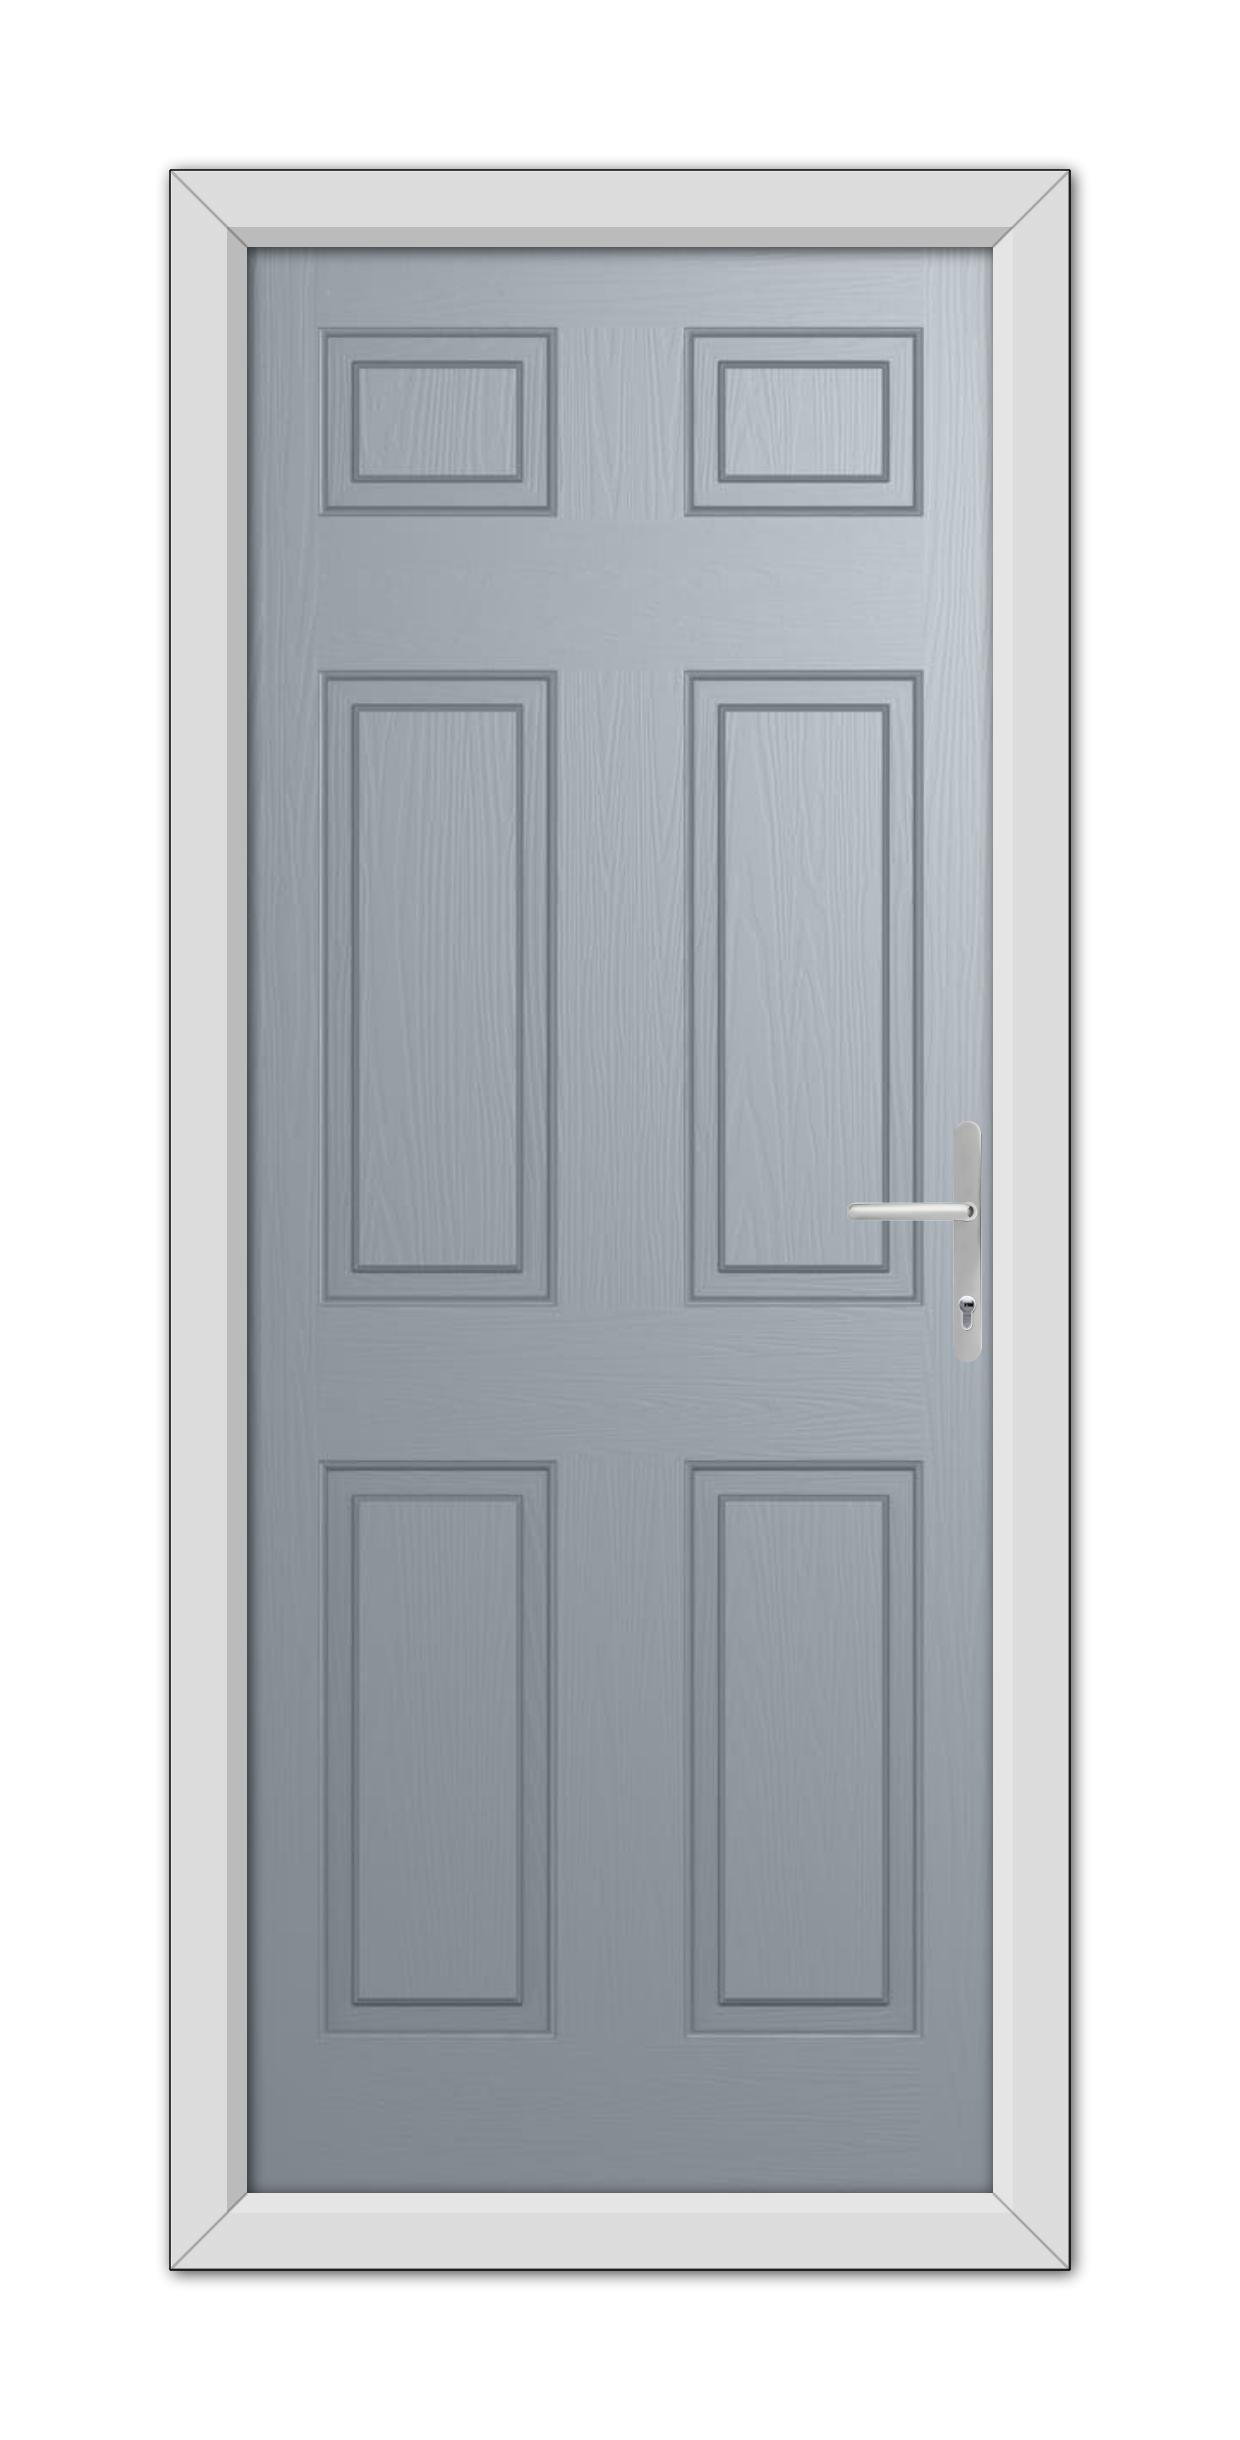 A French Grey Middleton Solid Composite Door with six rectangular panels and a silver handle, set within a white frame.